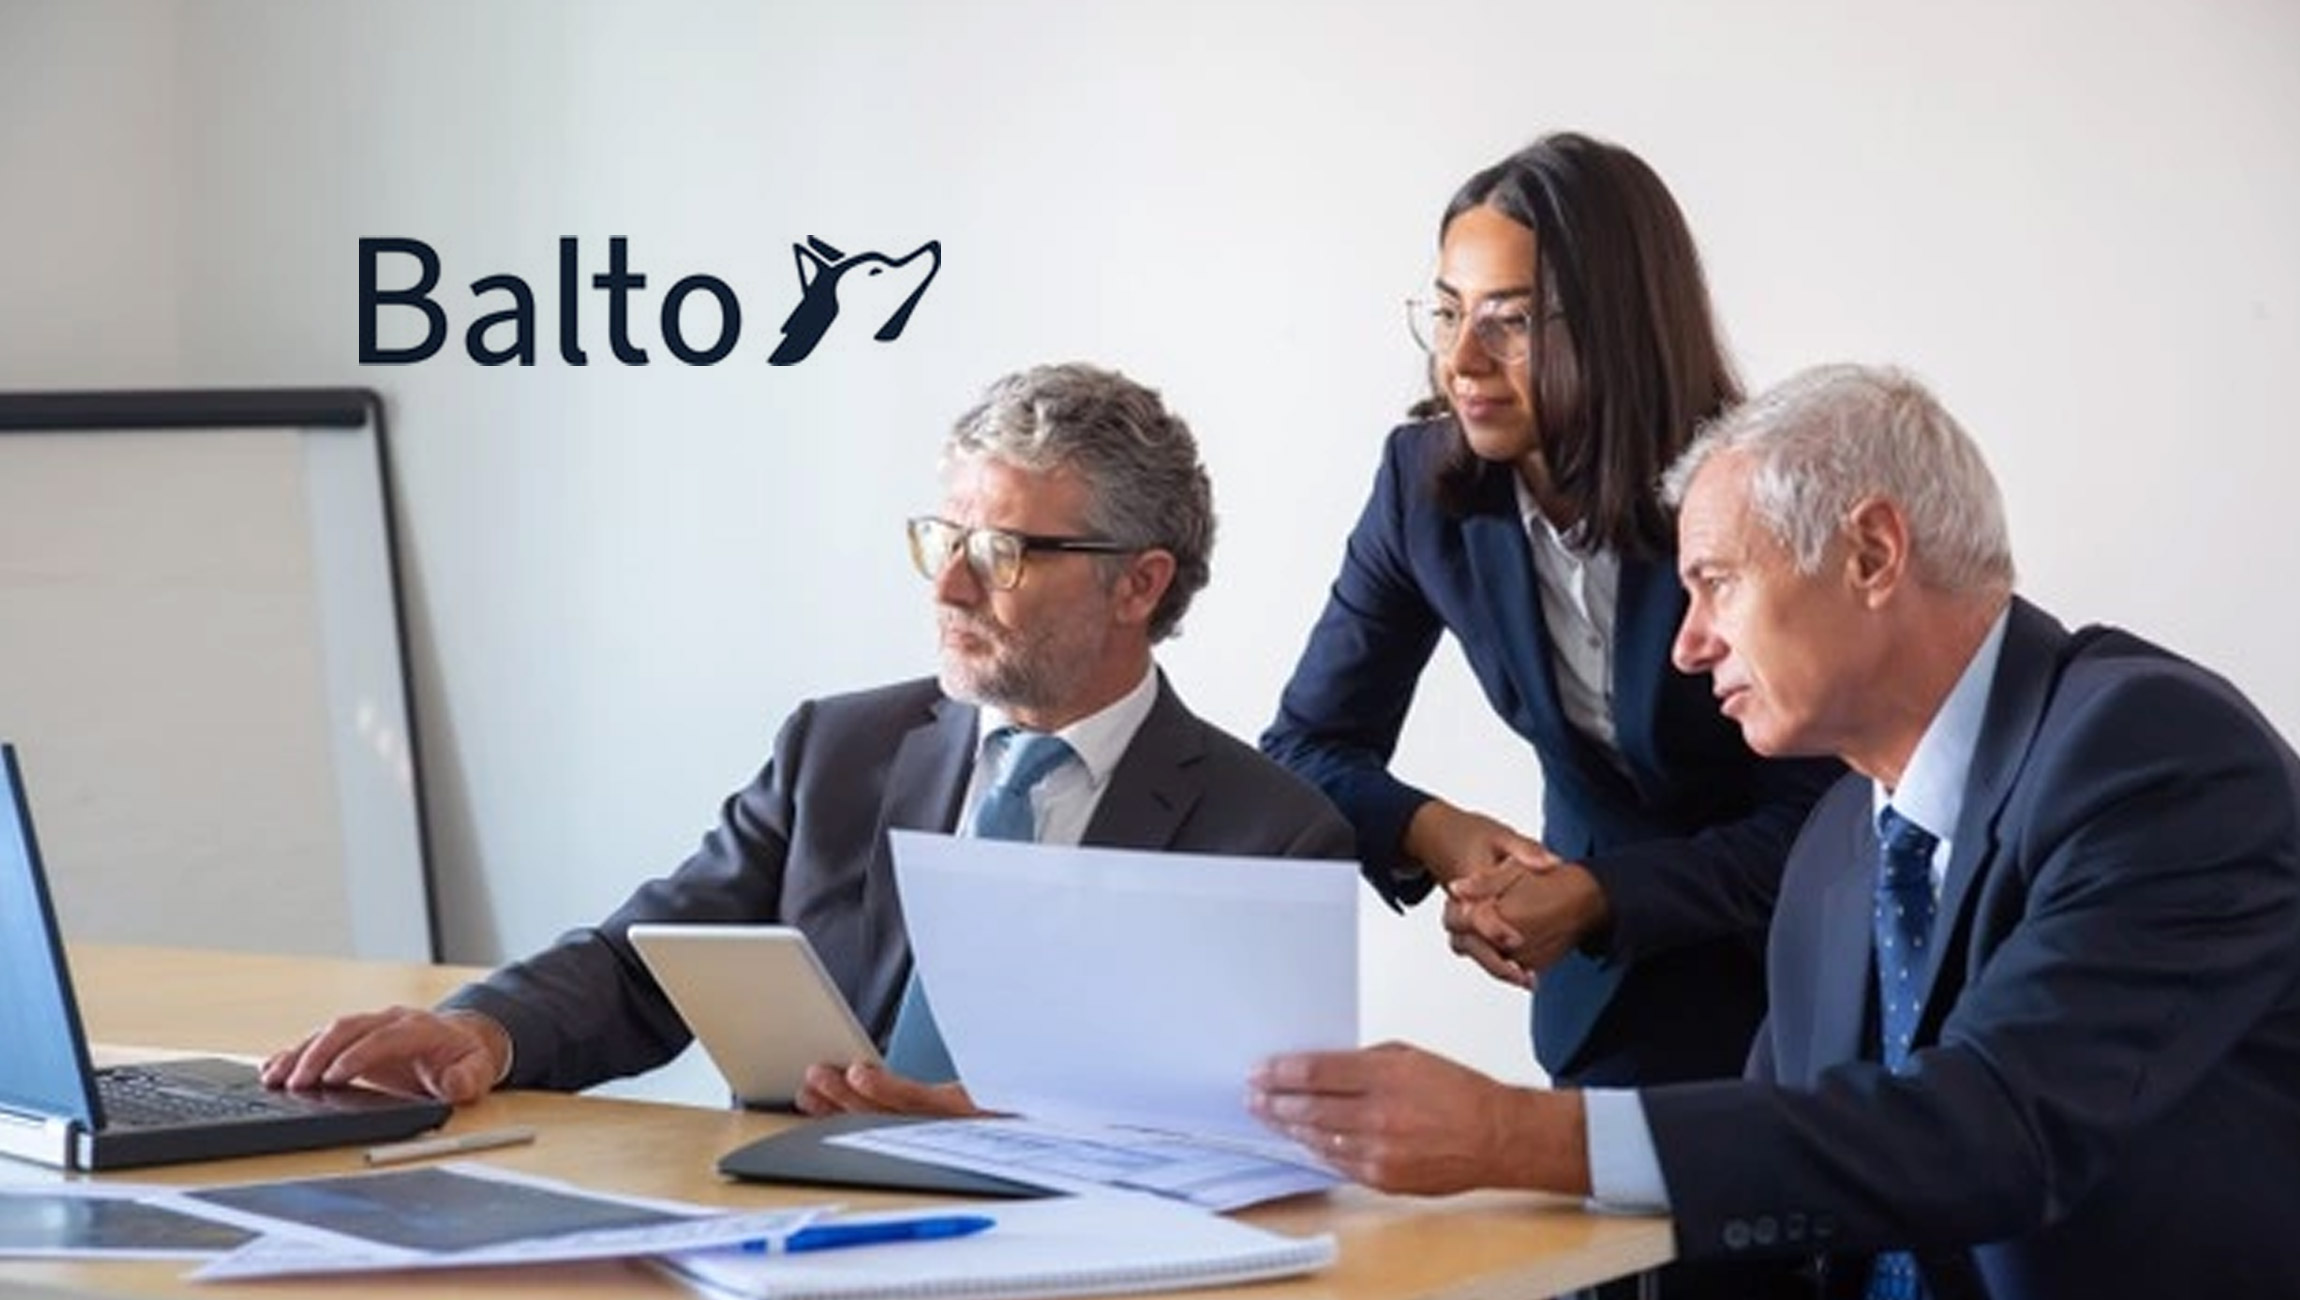 Balto First to Introduce Real-Time Guidance in Spanish for the Contact Center